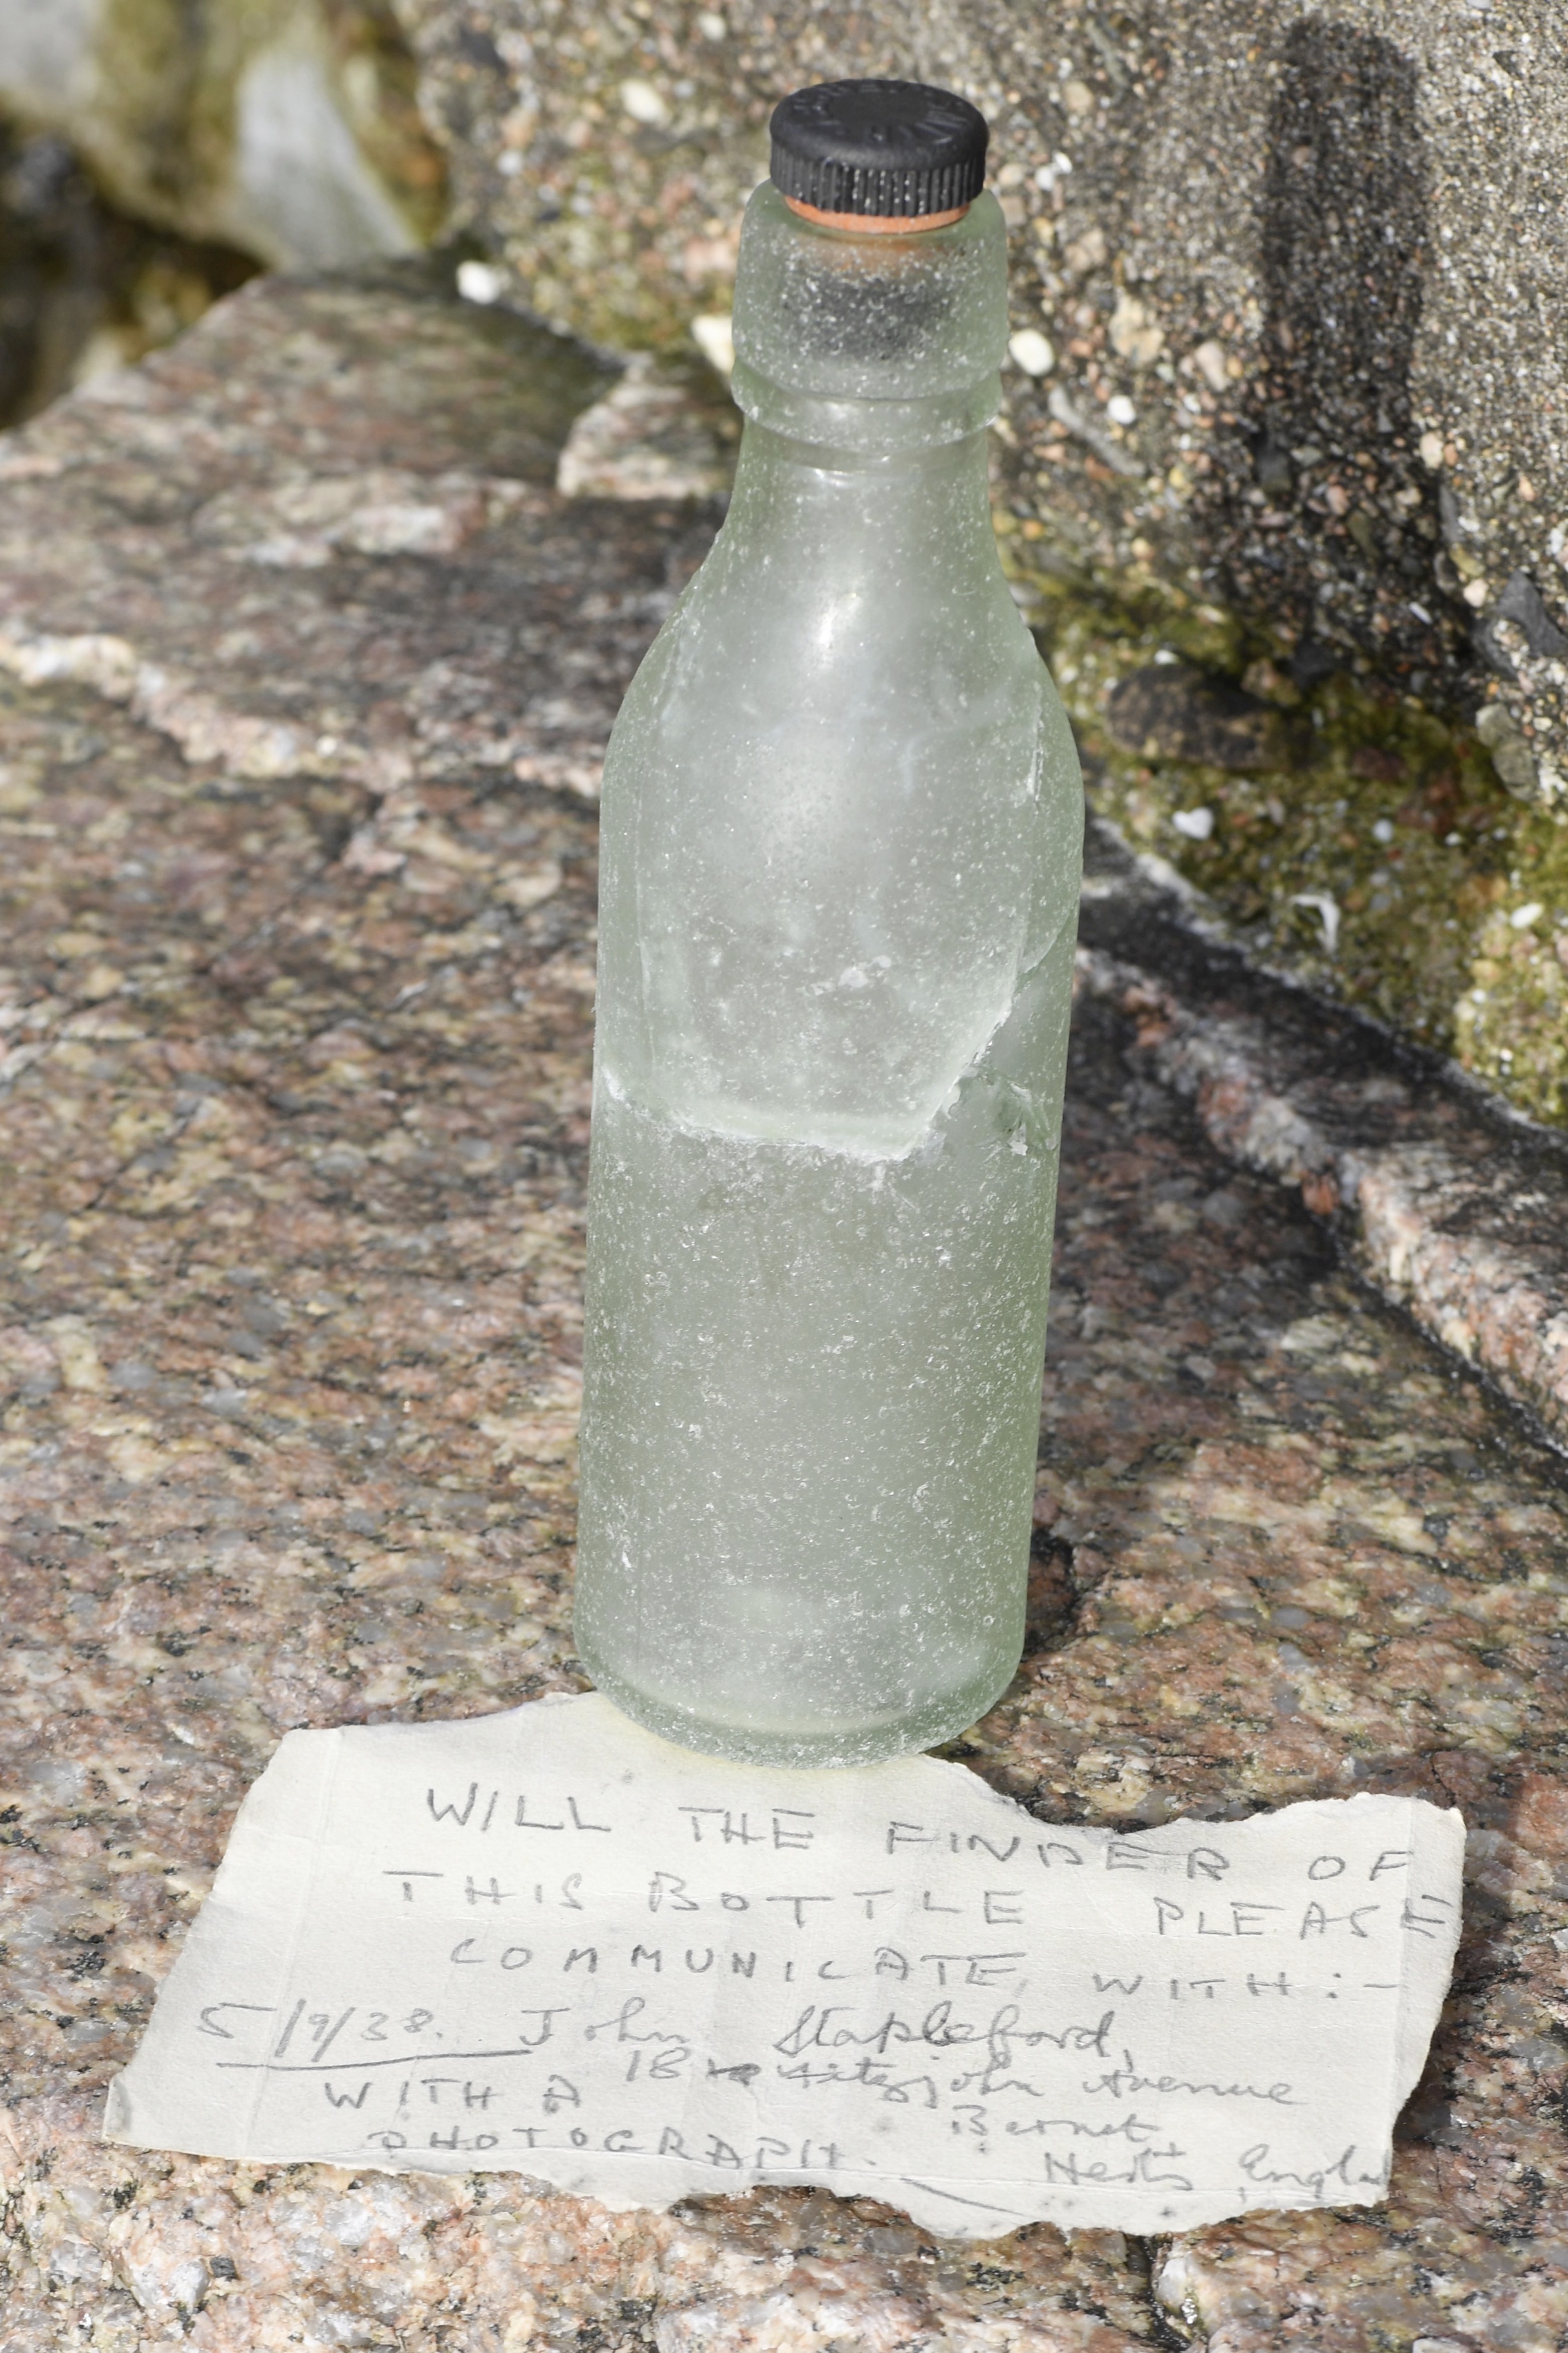 The message in a bottle    Picture: DAVID FERGUSON. (27208066)